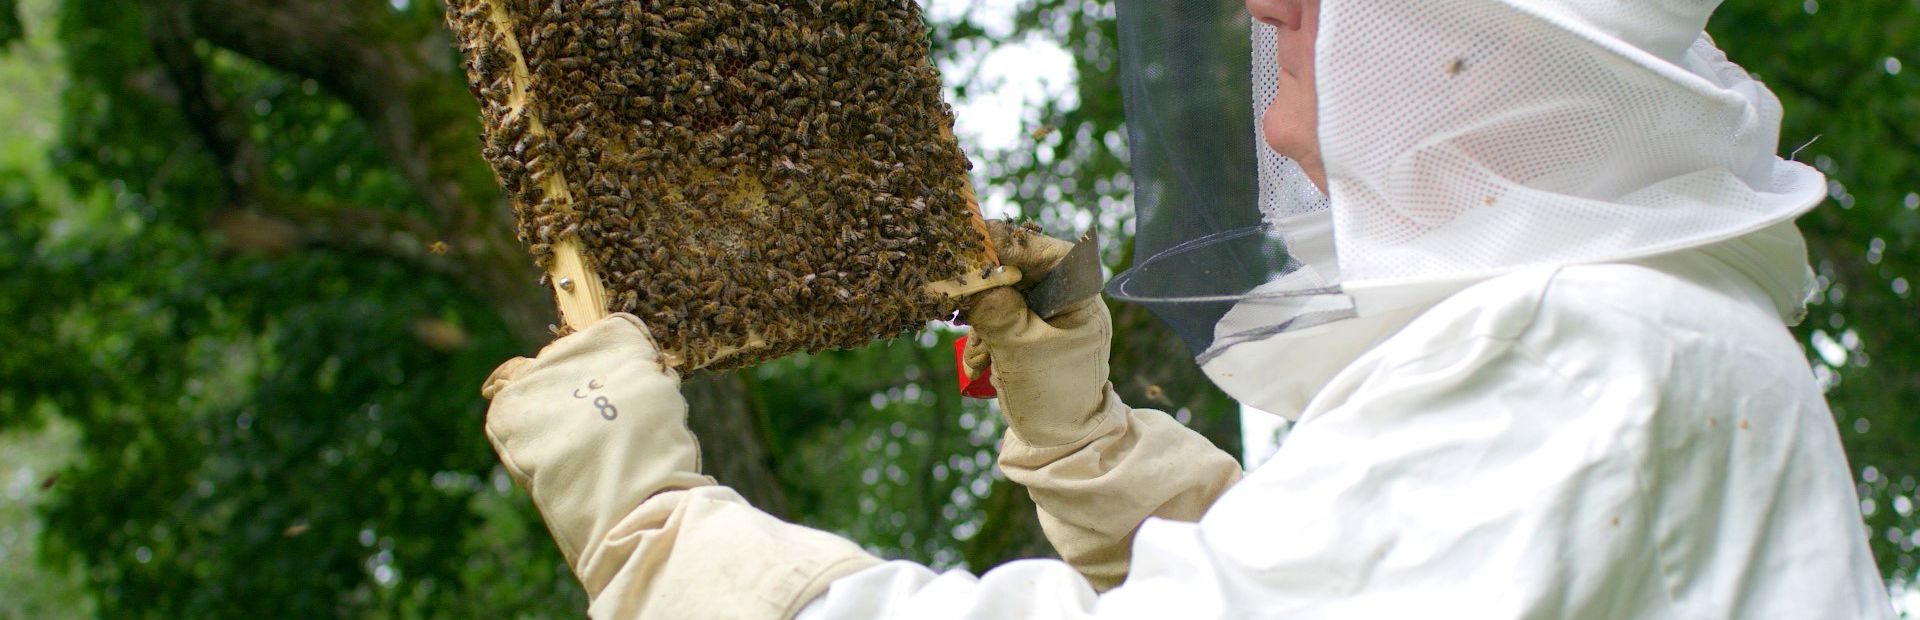 IoT to help protect bee populations